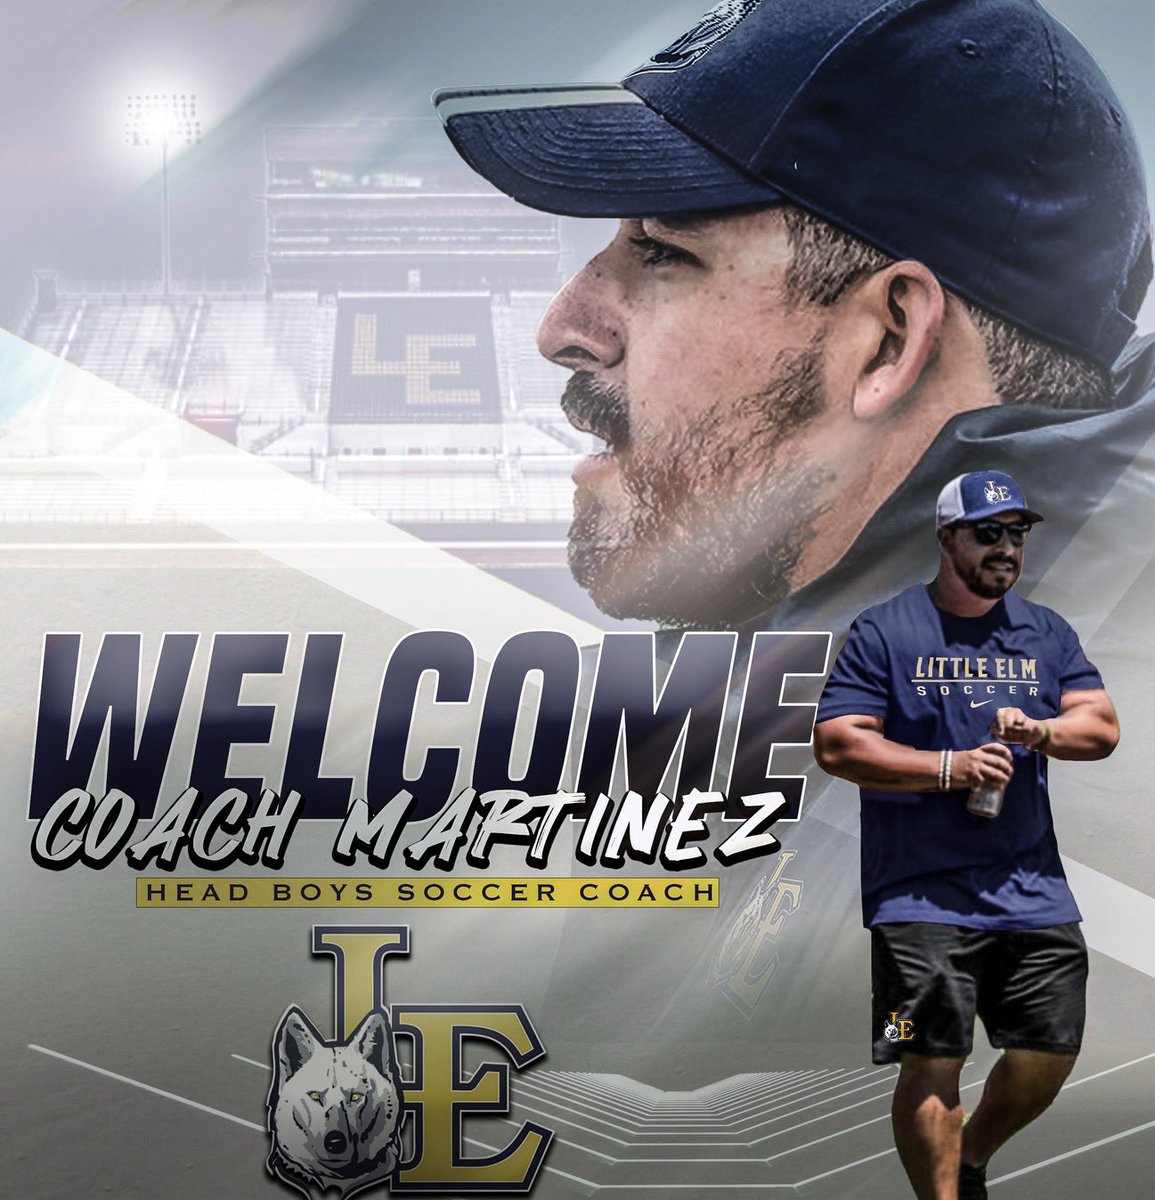 Excited to announce that I have accepted the boys soccer head coach job at Little Elm High School!! Eager to meet the team, families and community and get to work! Go Lobos!! 🐺⚽️